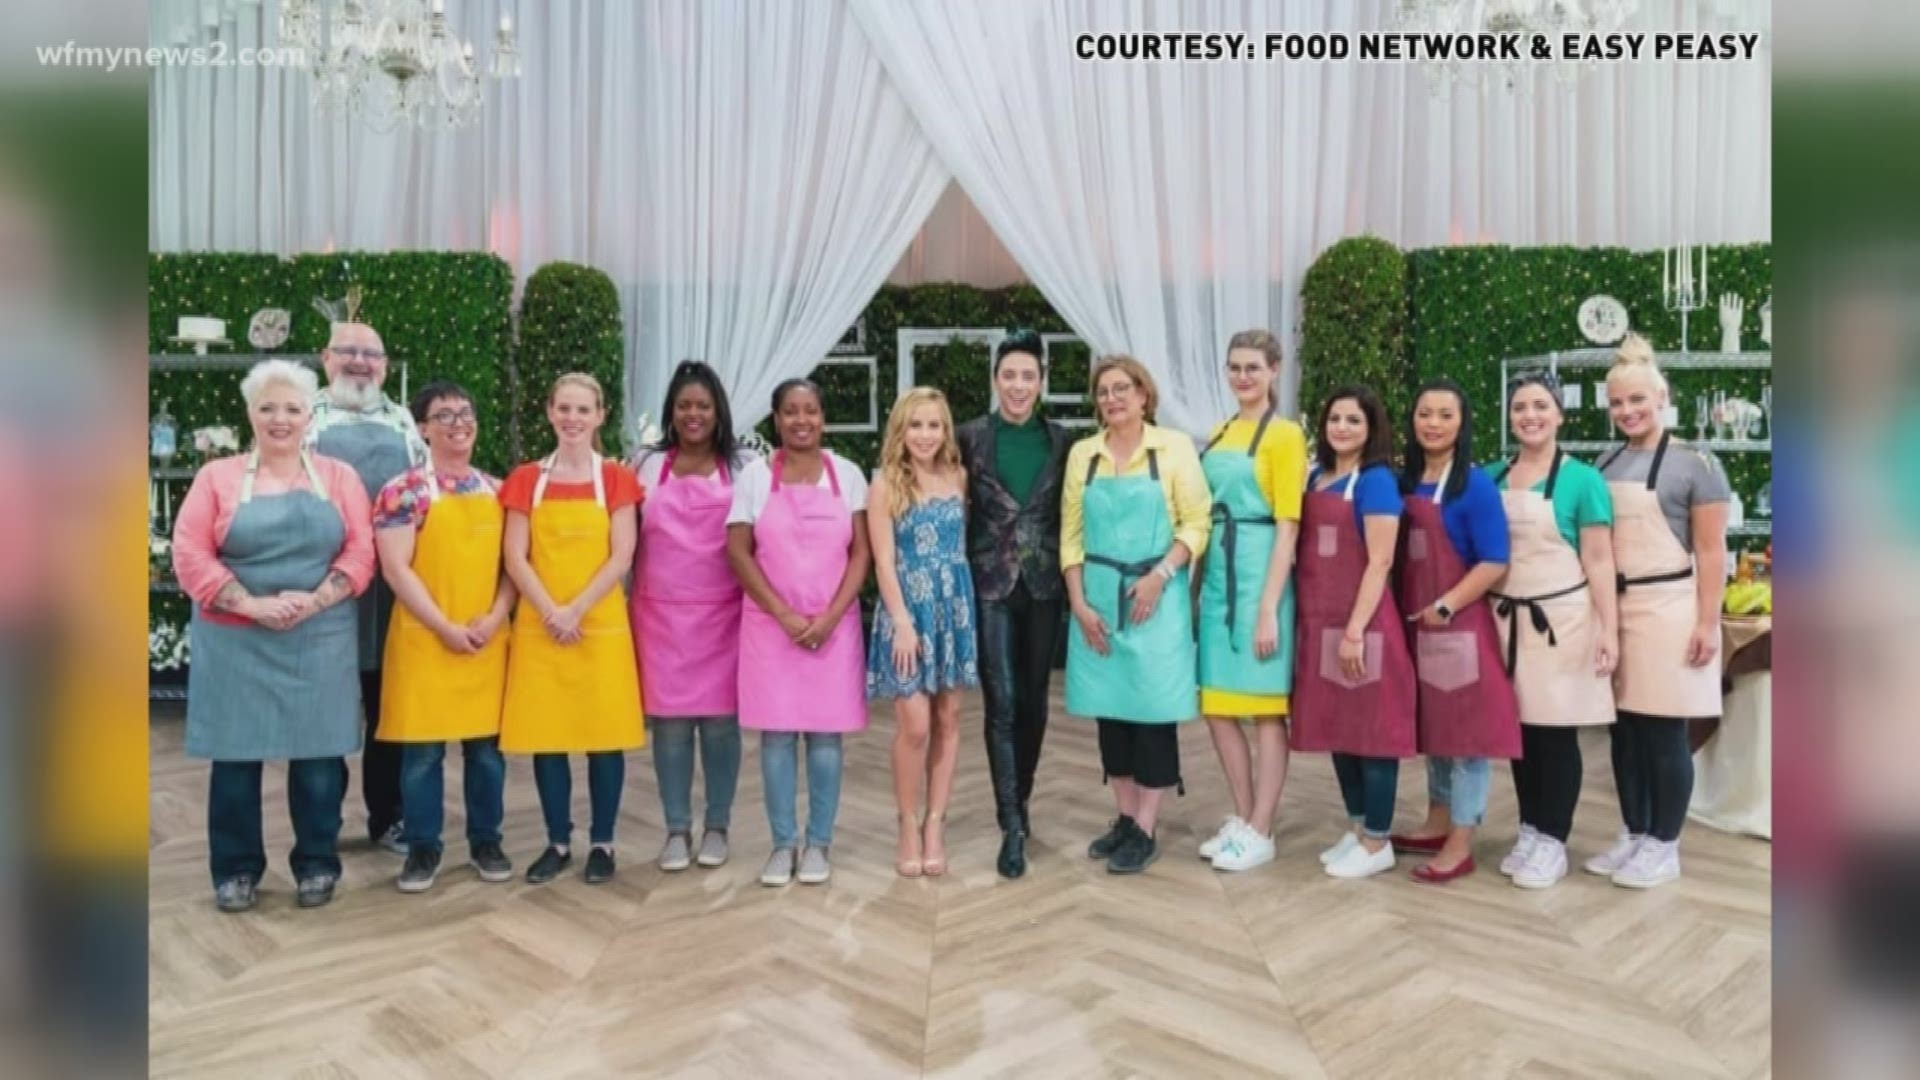 Spoiler alert: Greensboro bakers Traci and Erik Rankins were competing on the national TV show ‘Wedding Cake Championship,’ when they received some unwelcome news that changed the trajectory of their run for $25,000.